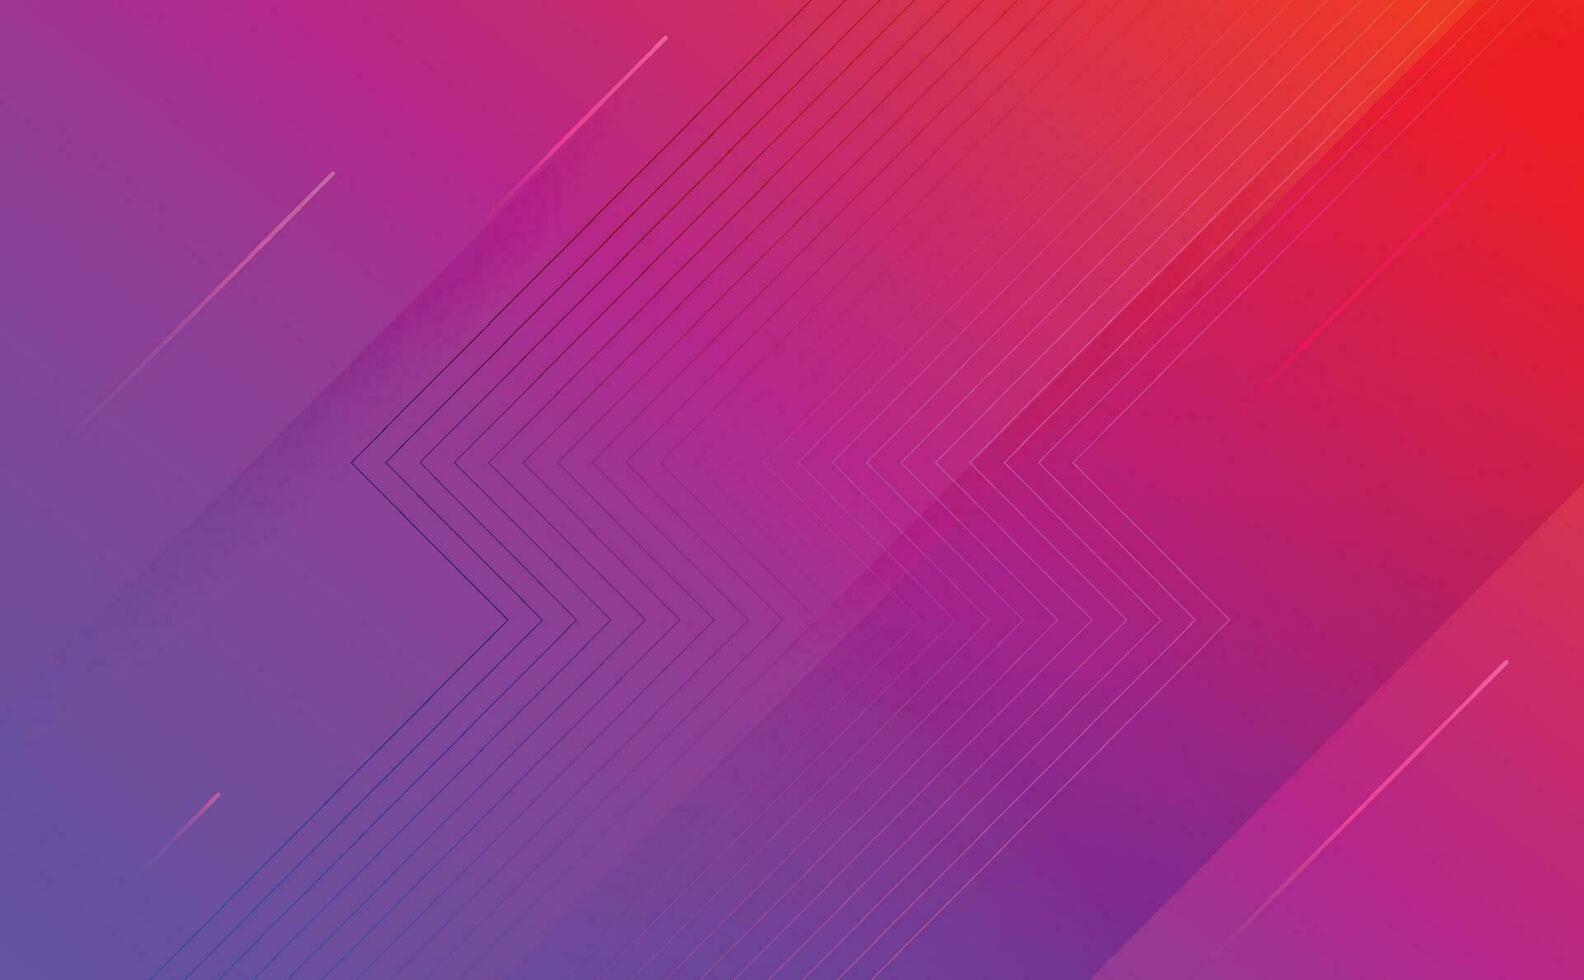 Red, pink and purple glowing wavy line pattern on dark blue background with copy space. Modern technology futuristic neon color concept. Abstract wide banner design. EPS10 vector